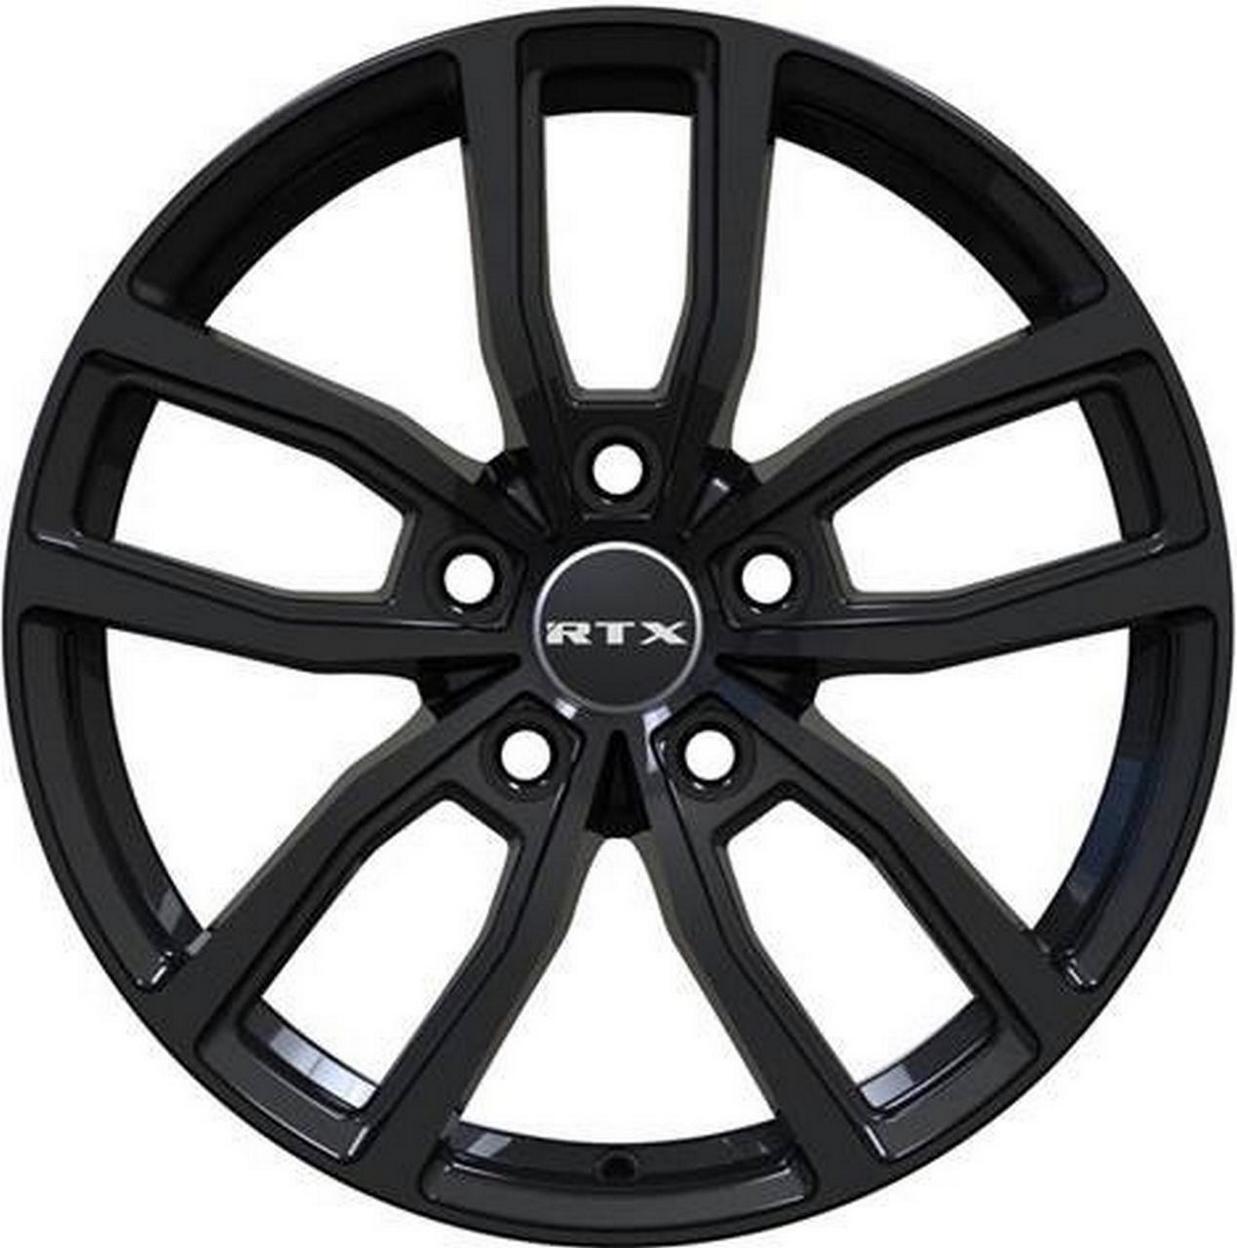 One Wheel (1) fits your 2003-2006 Honda Accord | RTX (RTX) | 163706 | Solstice |